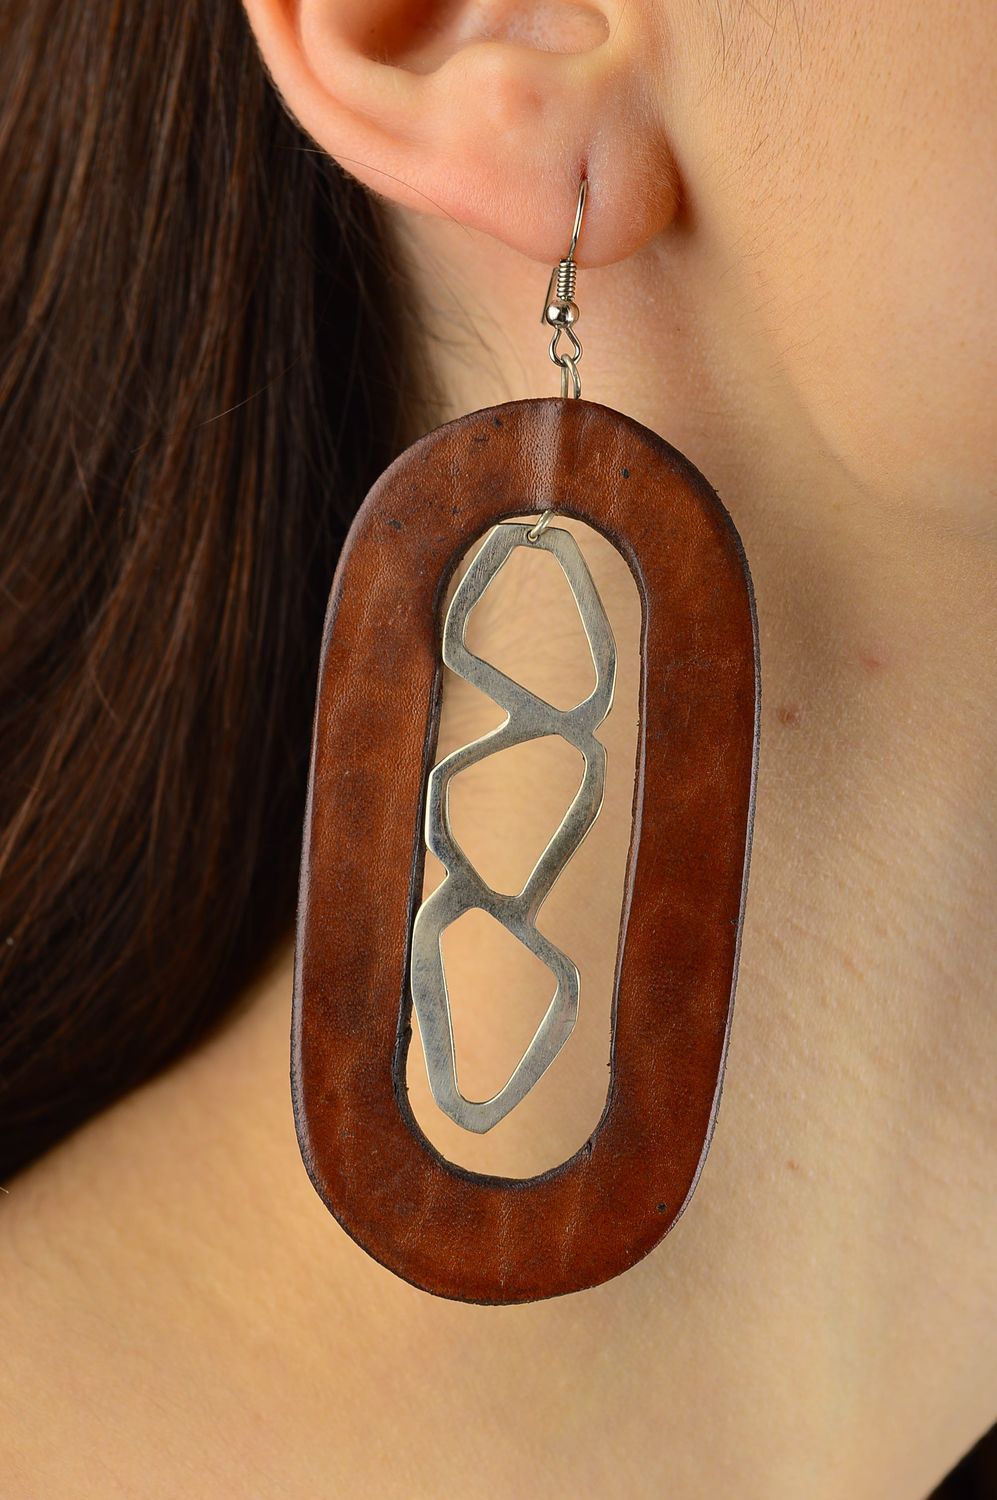 Large handmade leather earrings costume jewelry designs best gifts for her photo 1